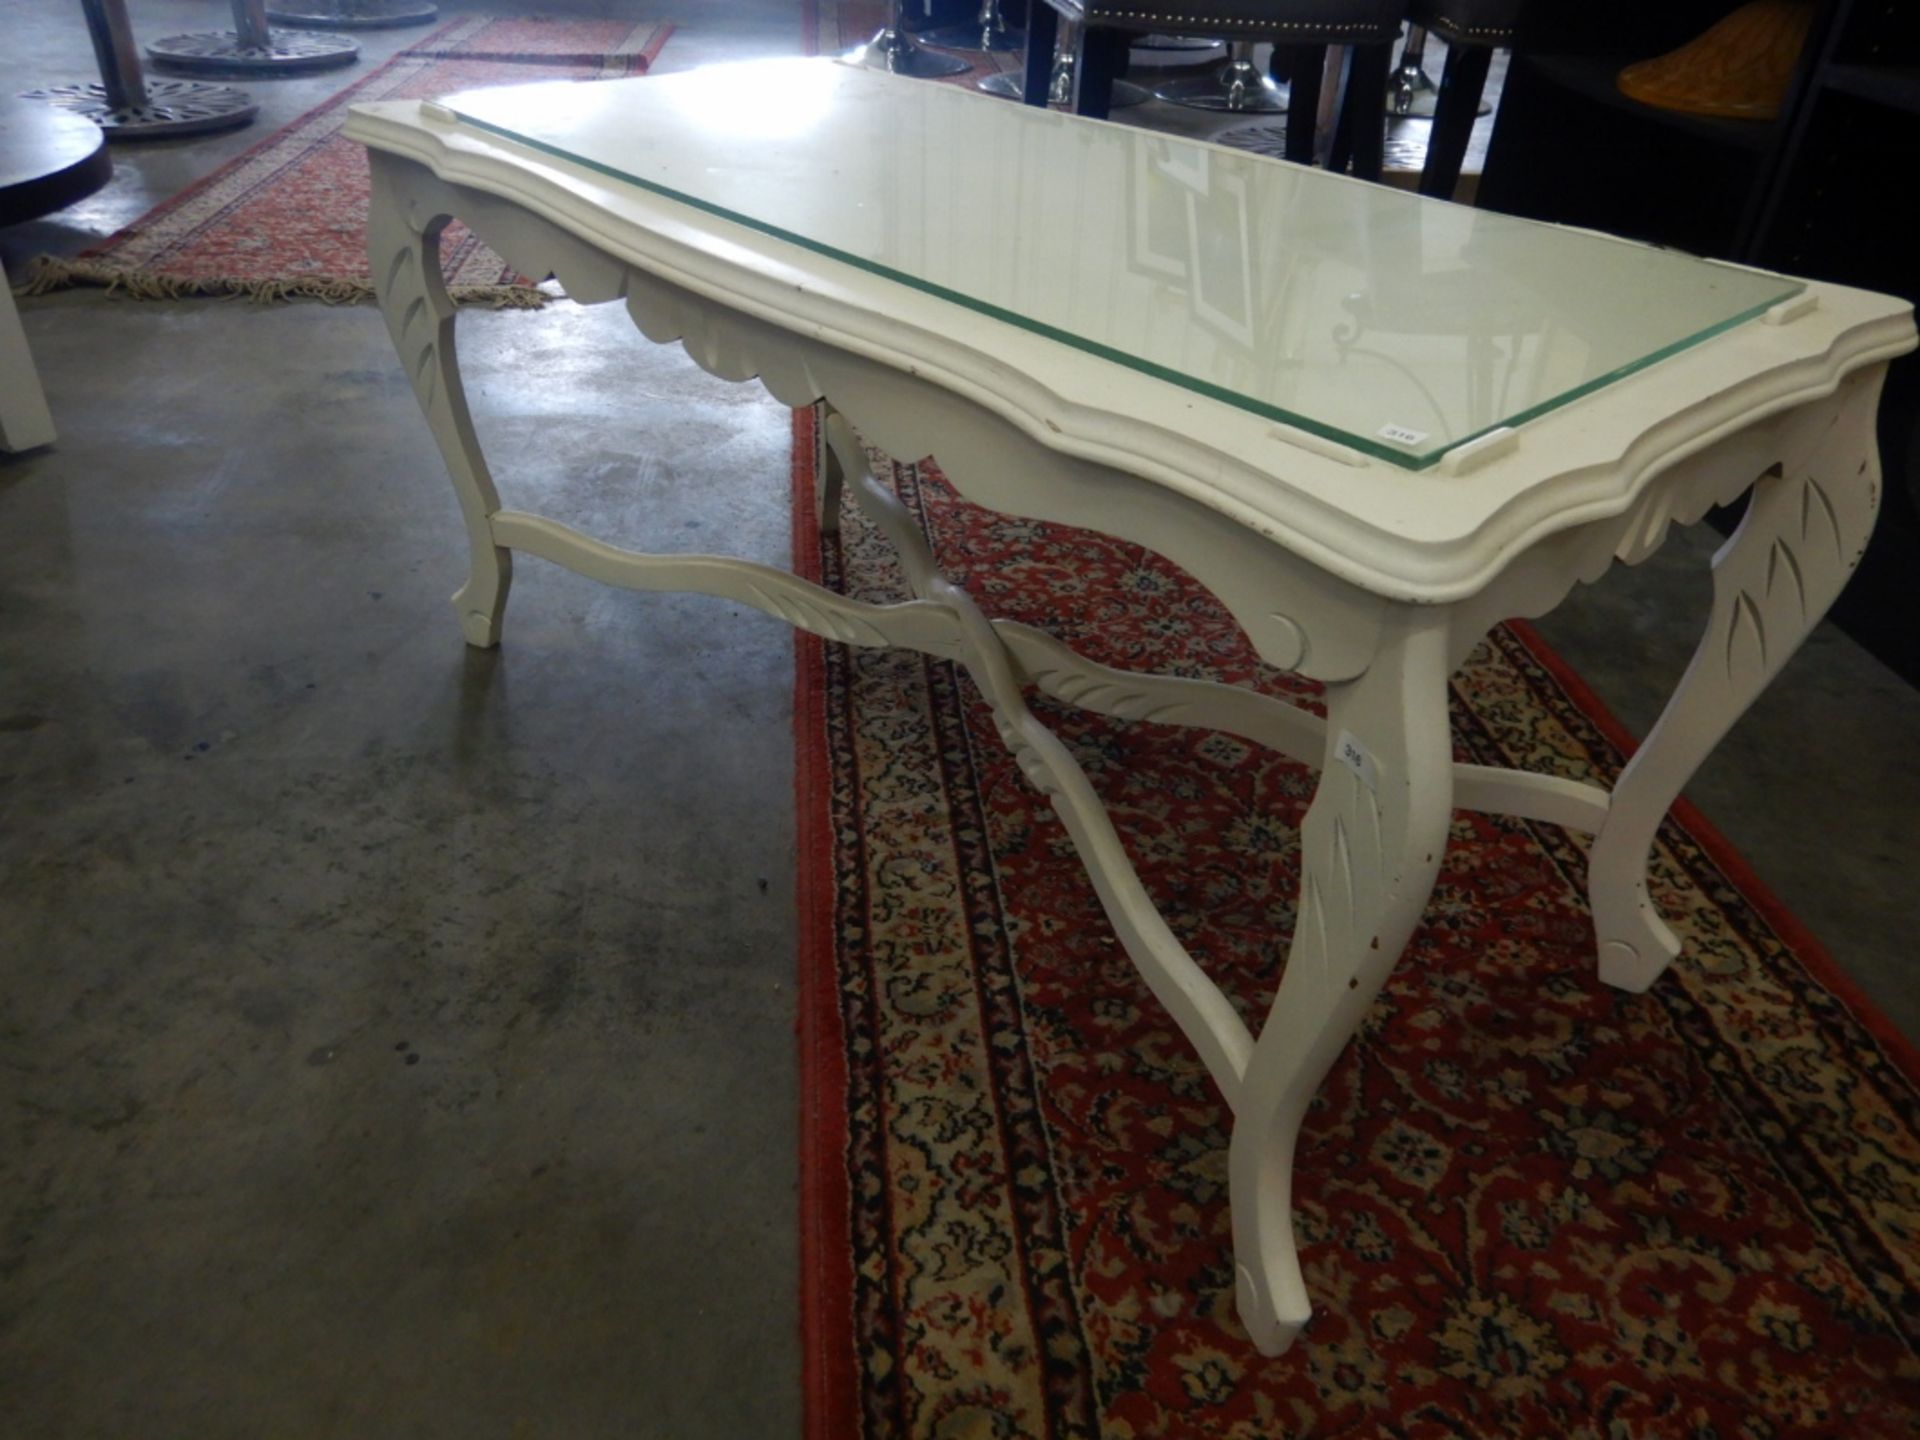 ANTIQUE COFFEE TABLE PAINTED OFF WHITE, W/GLASS INSET TOP-33 3/4"W X 17"D X 17 1/4"H